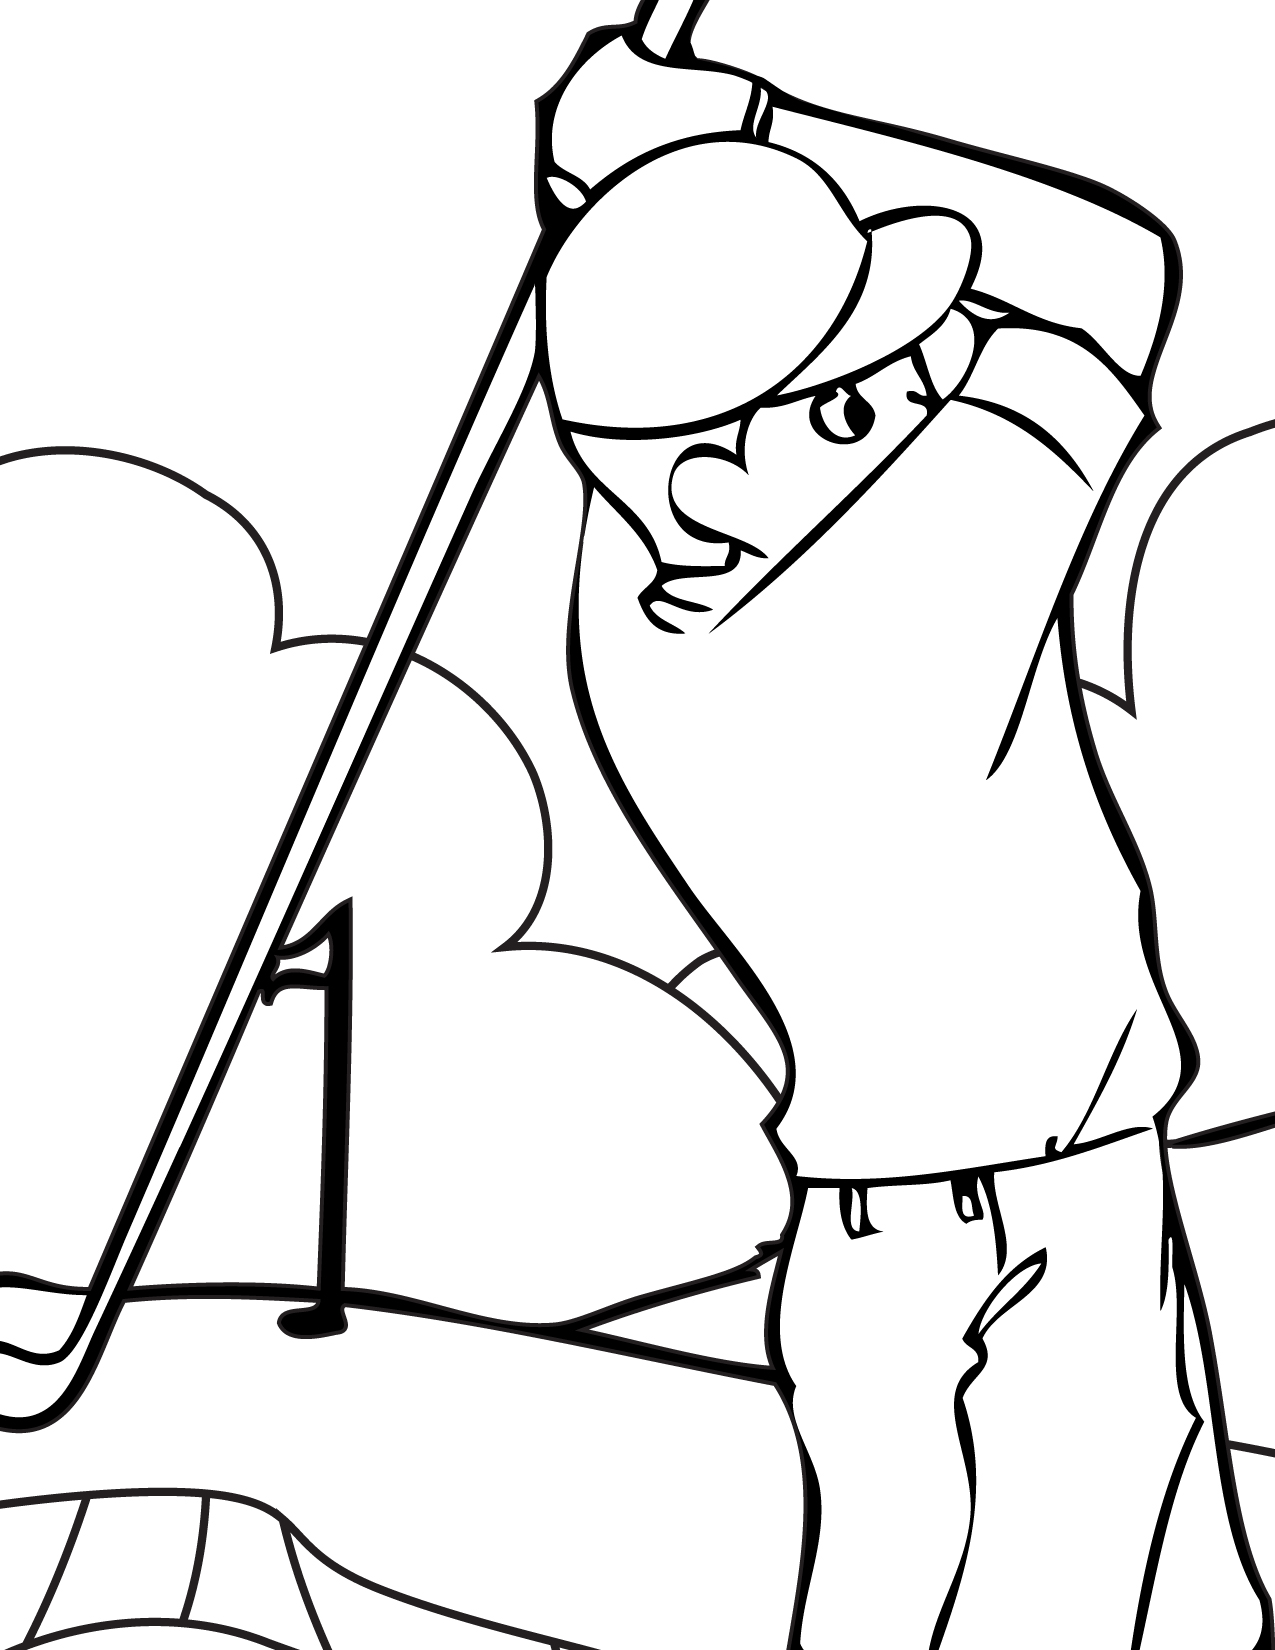 Golf Player coloring page